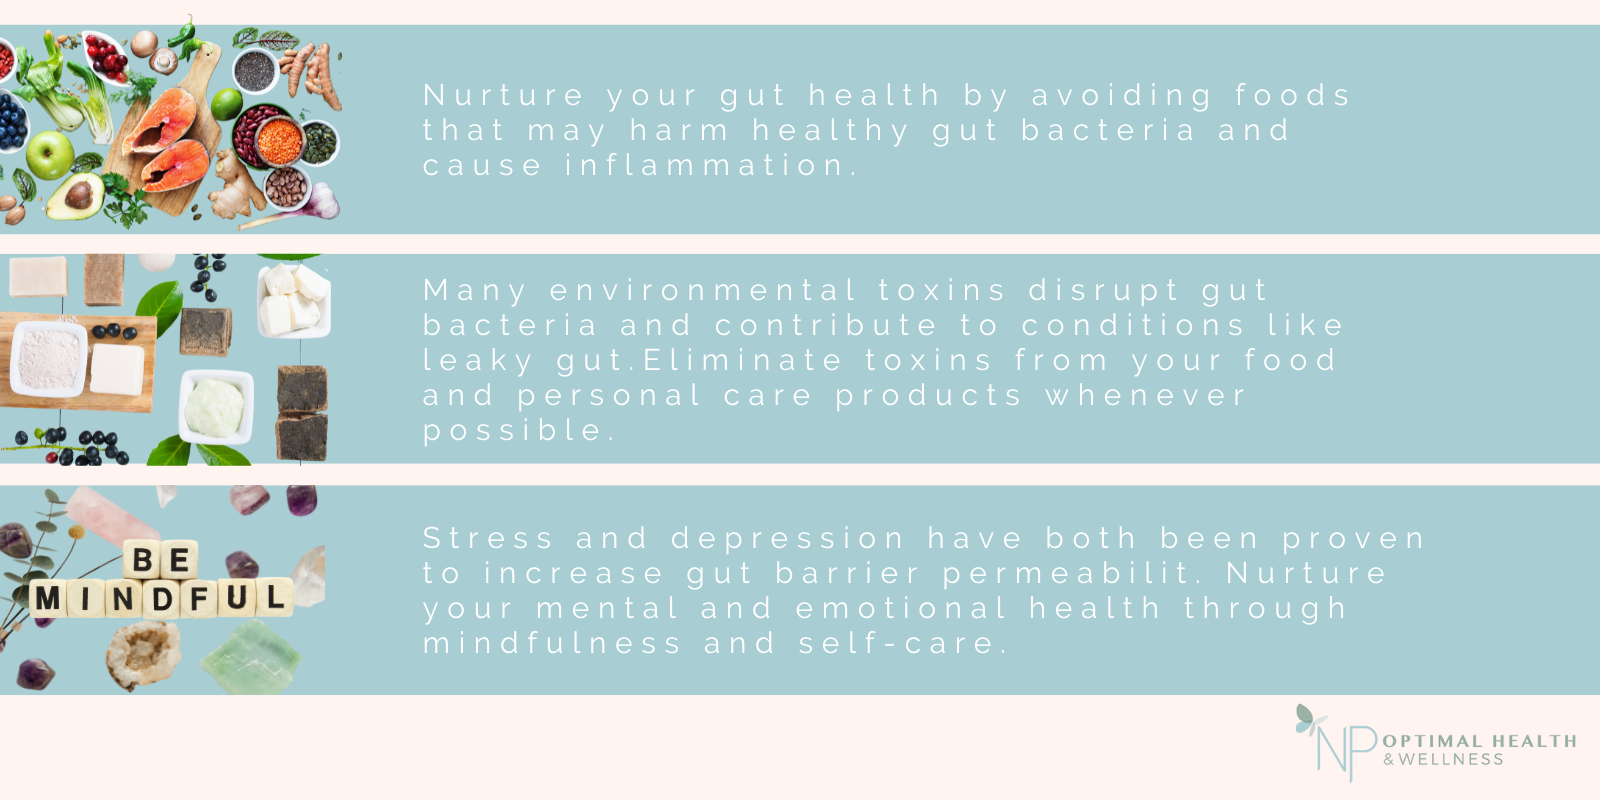 Ways to nurture a healthy gut through diet, stress management and reducing exposure to environmental toxins. 